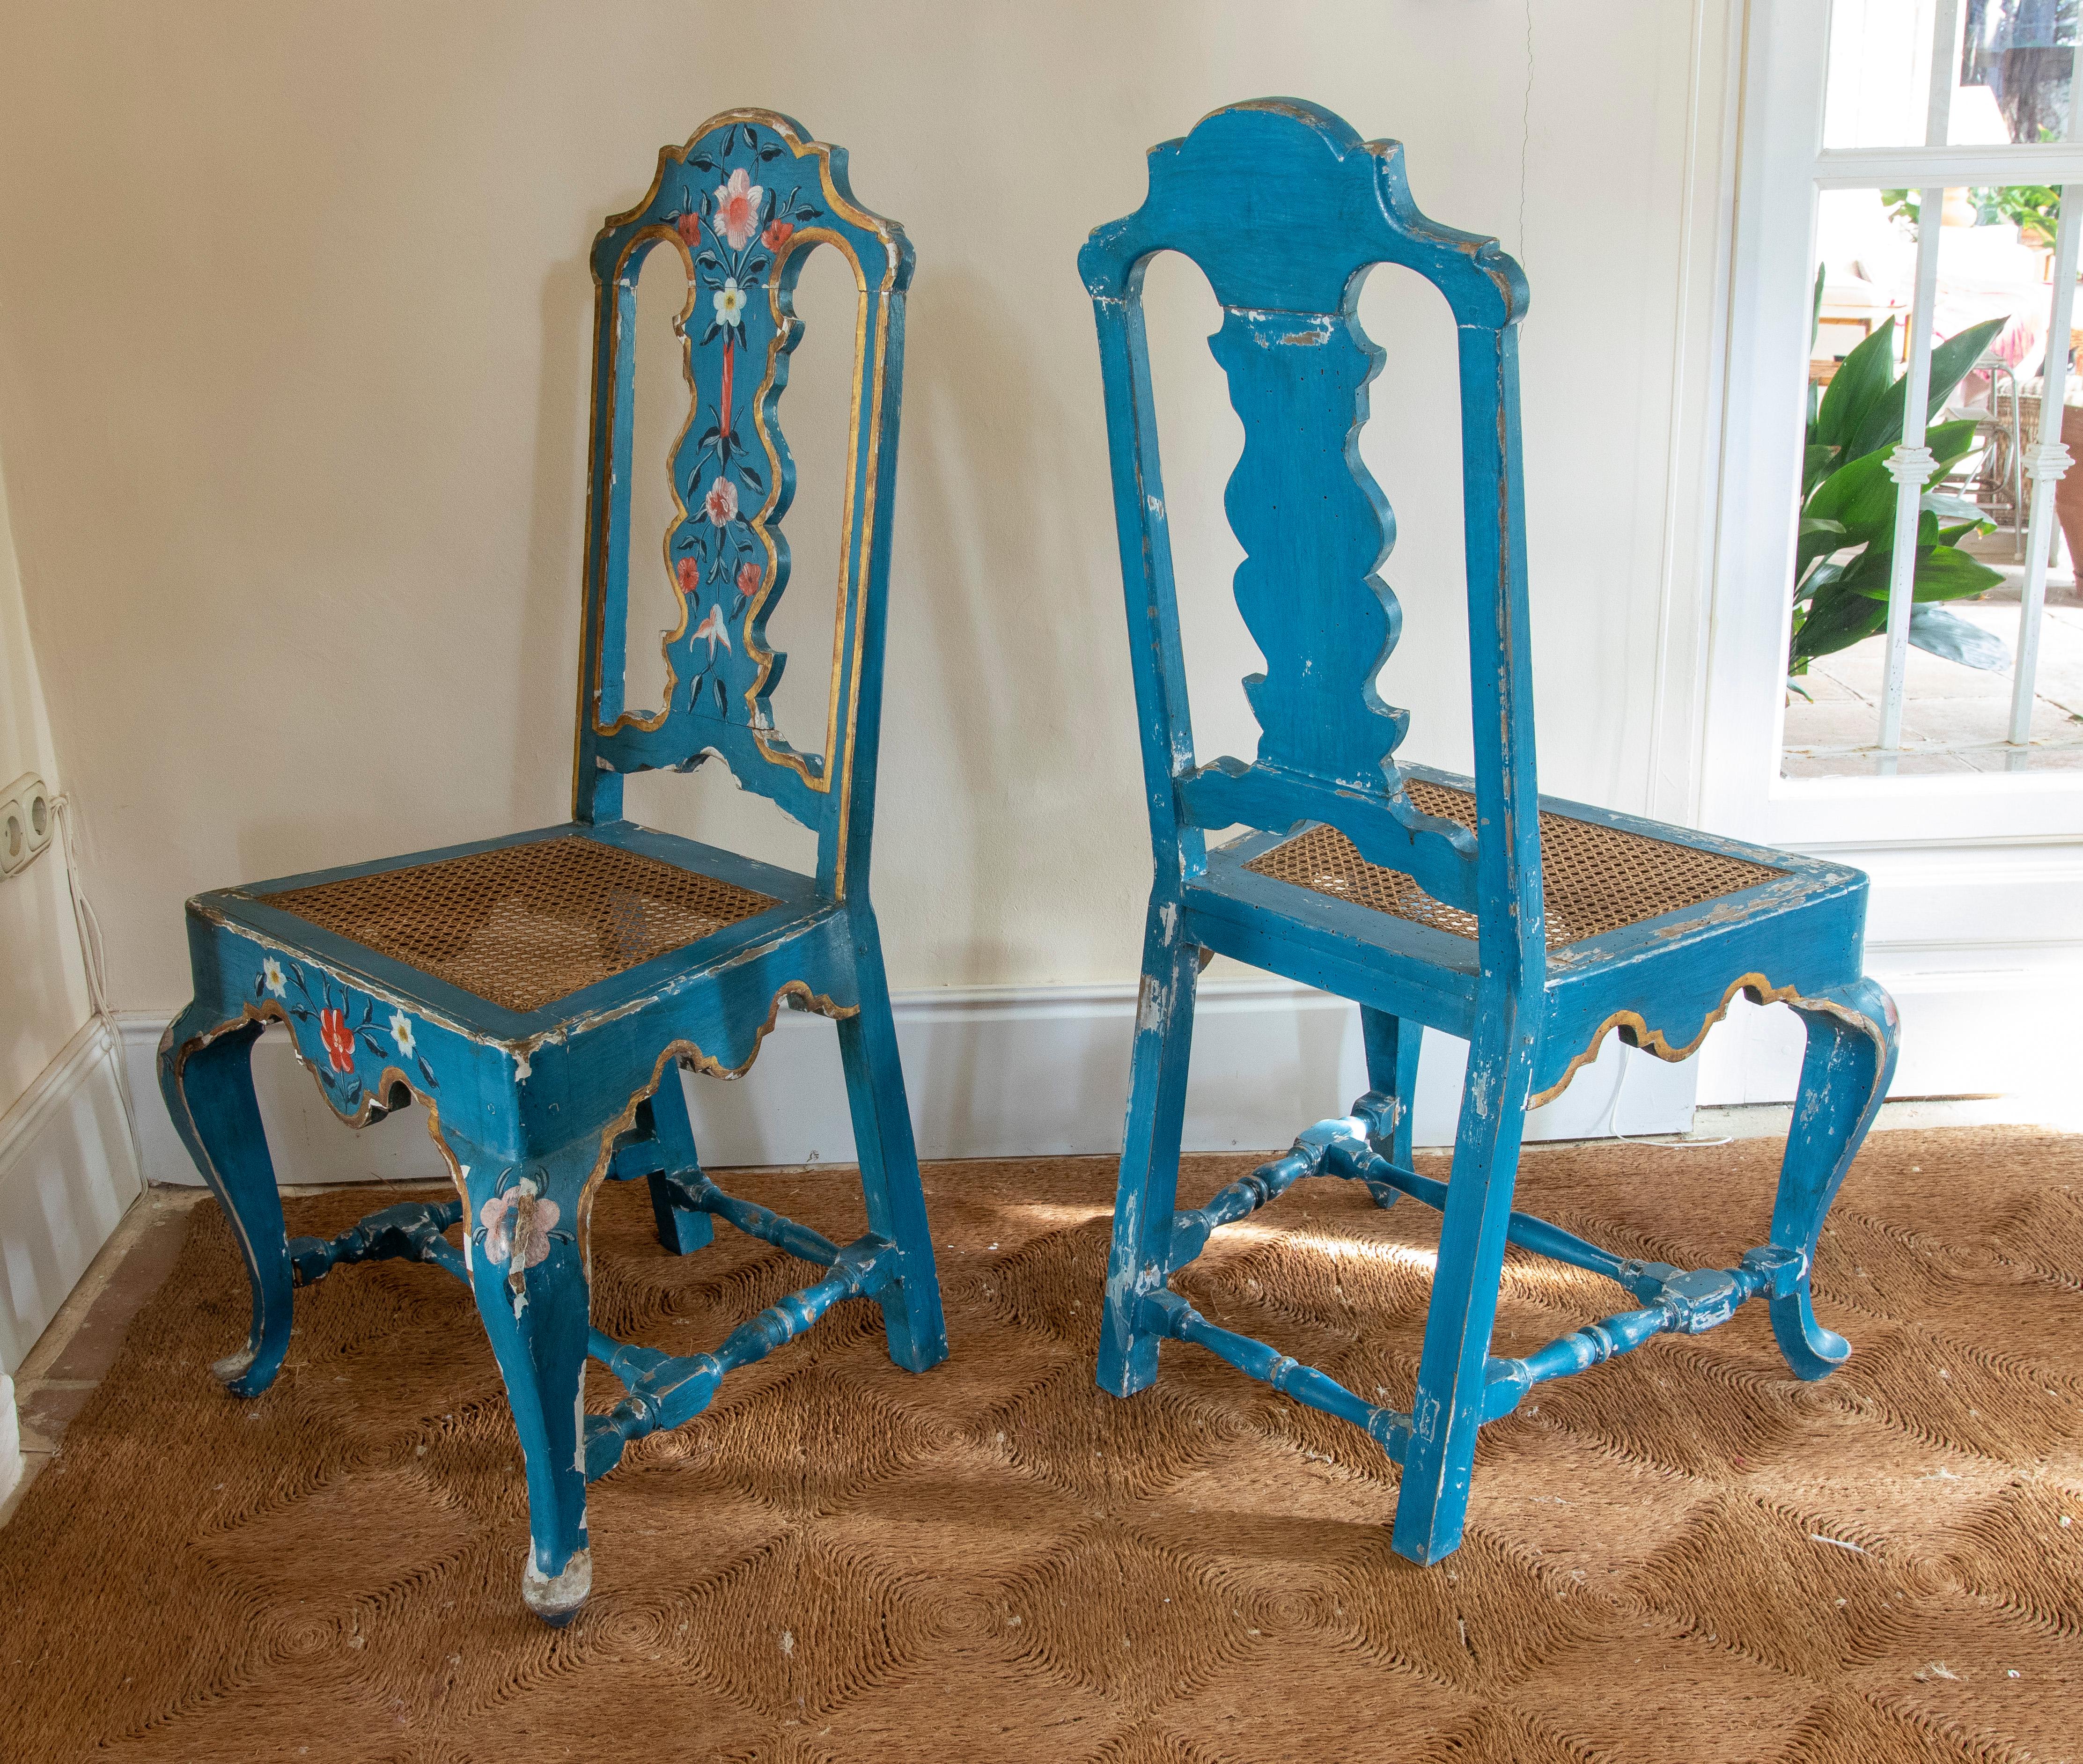 painted chairs for sale